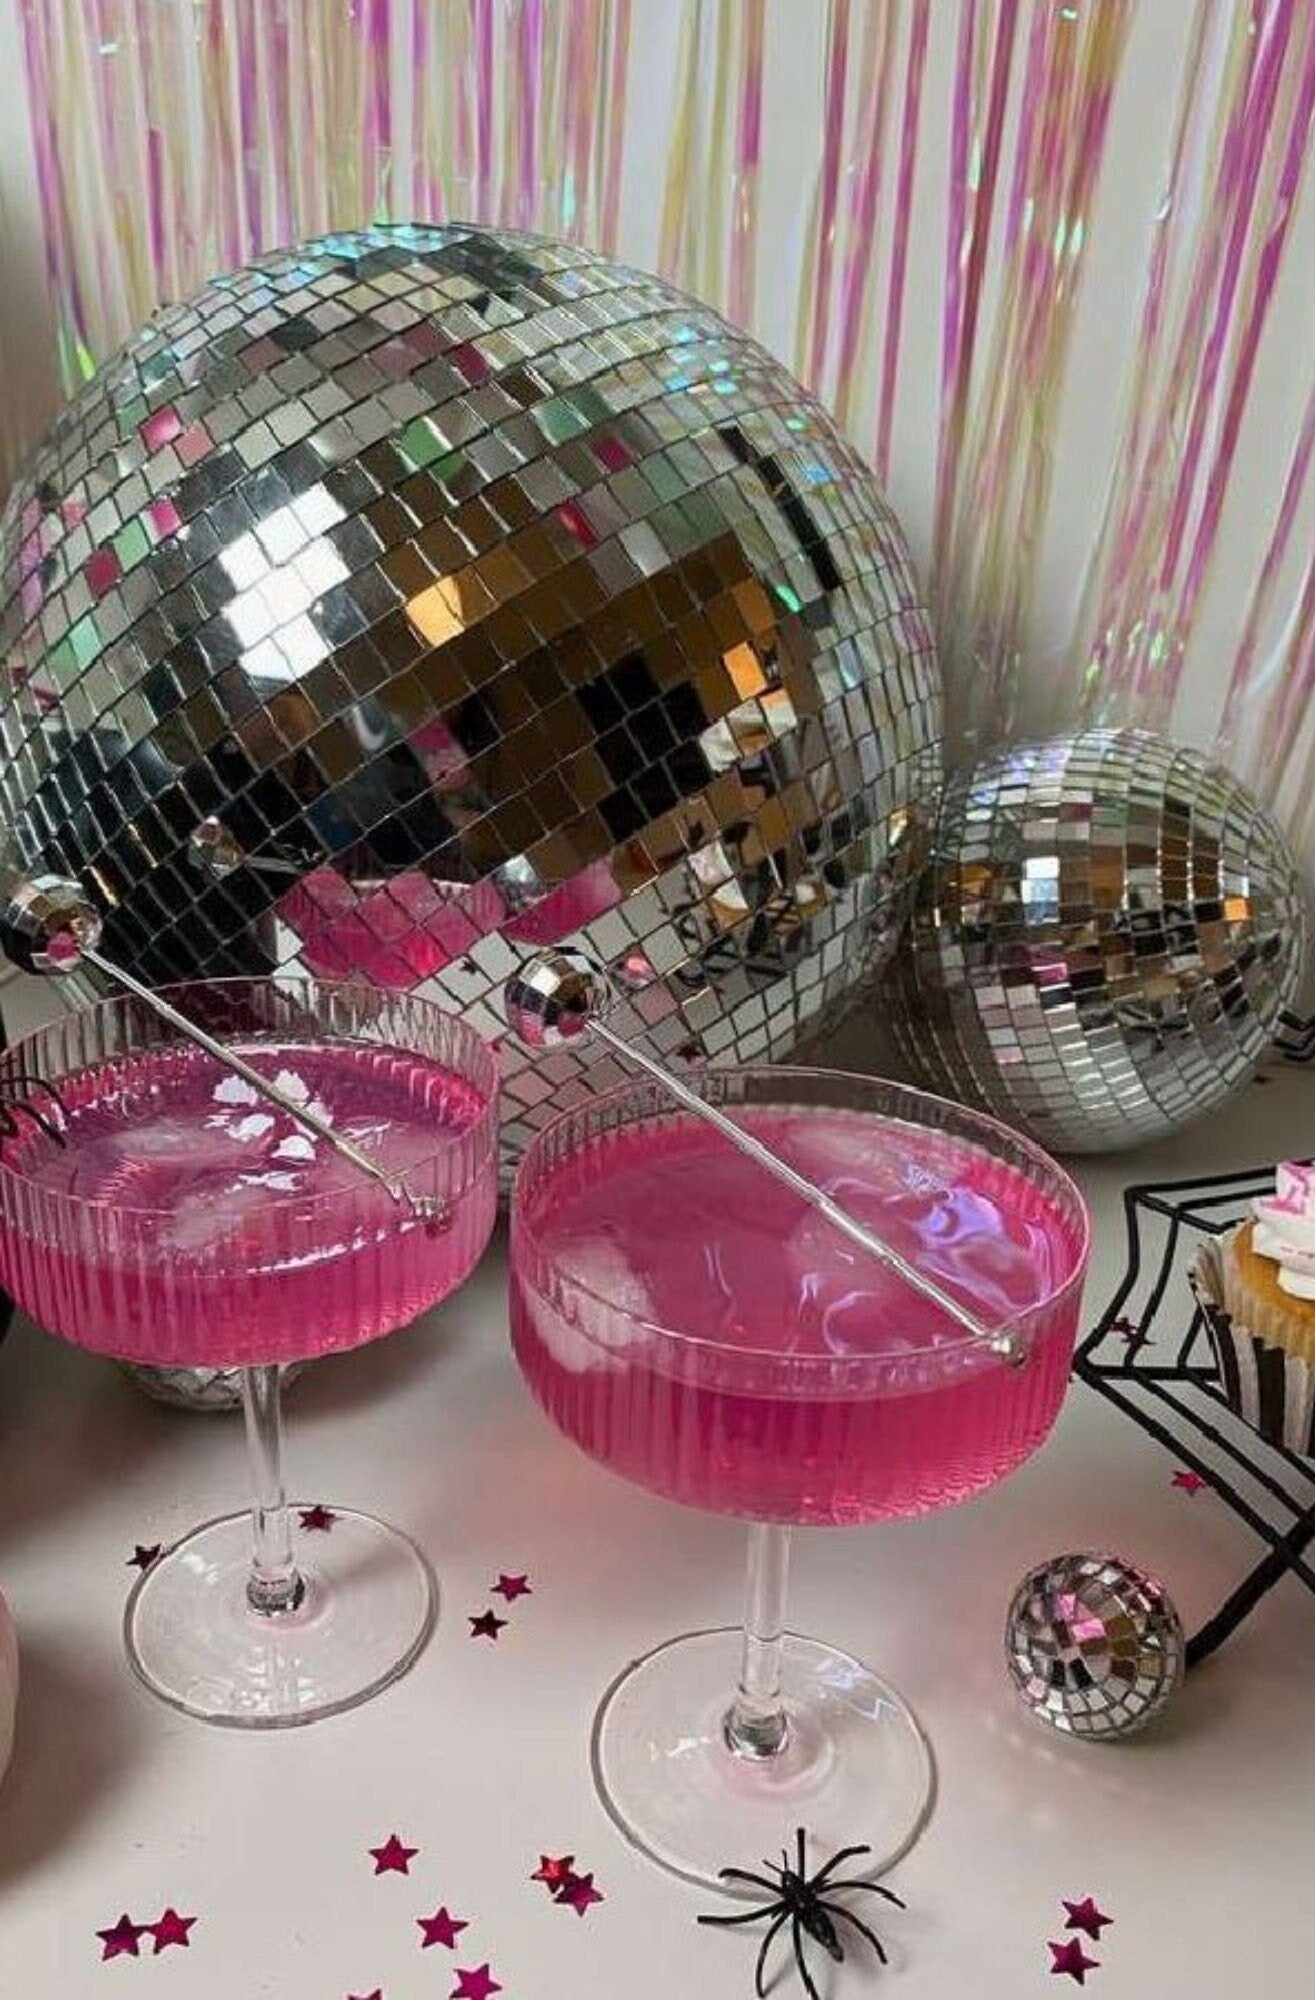 Disco Ball Mirror Ball 12 inch Mirror Ball Large Disco Ball Disco Ball 12  inch,Hanging Party Disco Ball for Party Design,Wedding Decoration.